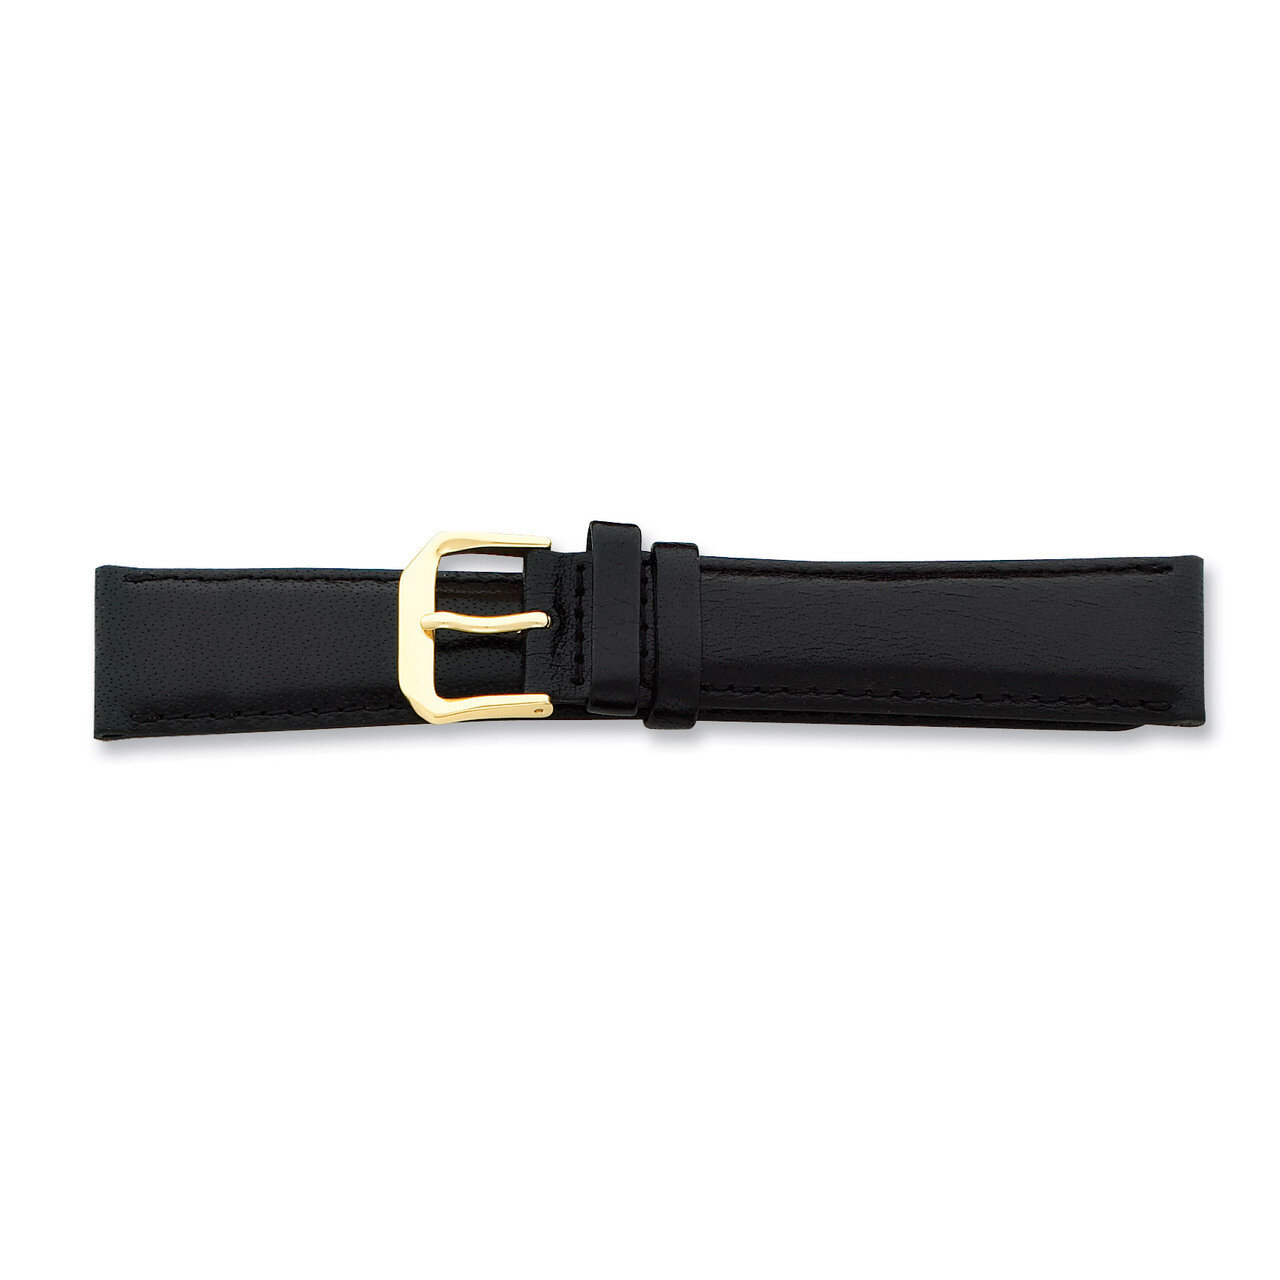 17mm Black Smooth Leather Buckle Watch Band 7.5 Inch Gold-tone BA8-17